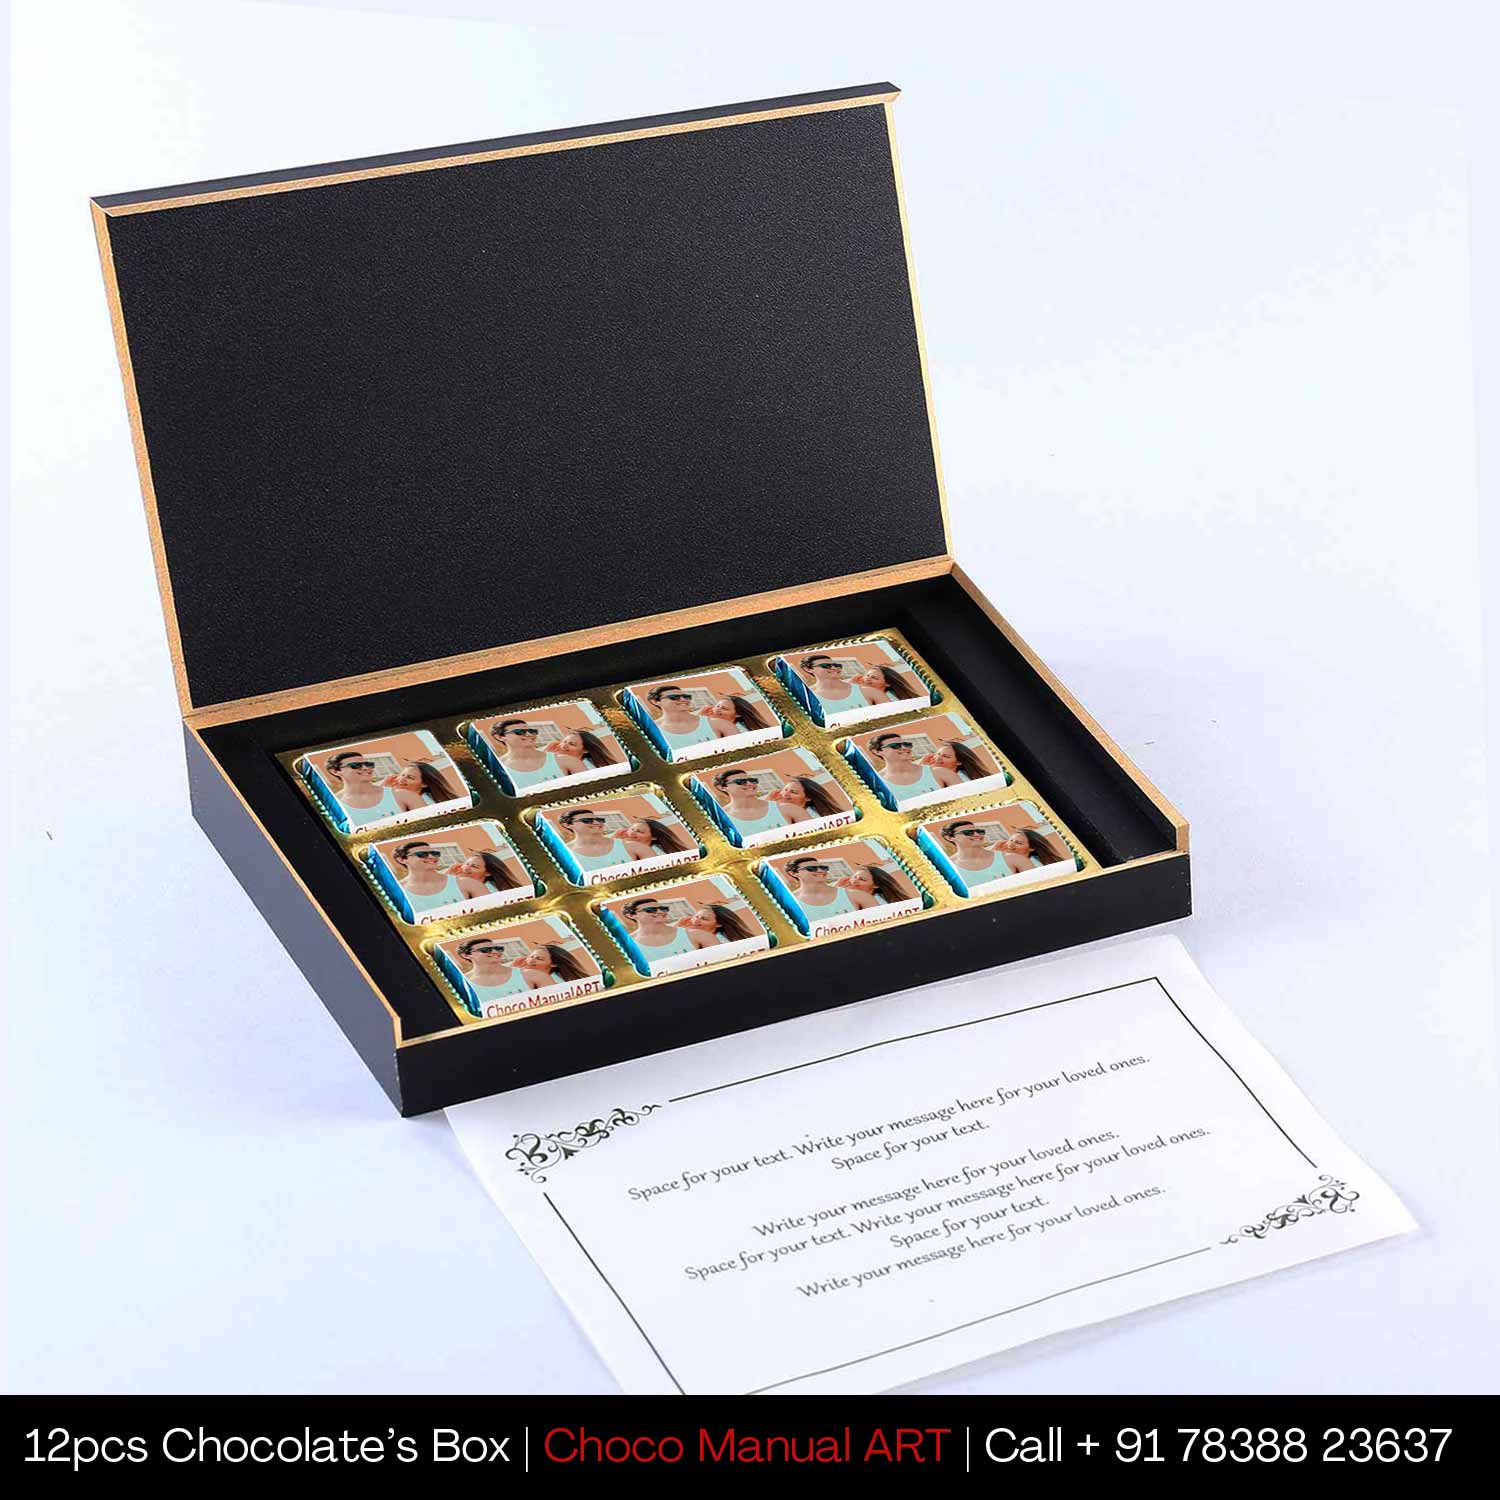 Photo Printed Chocolates with graceful design on box